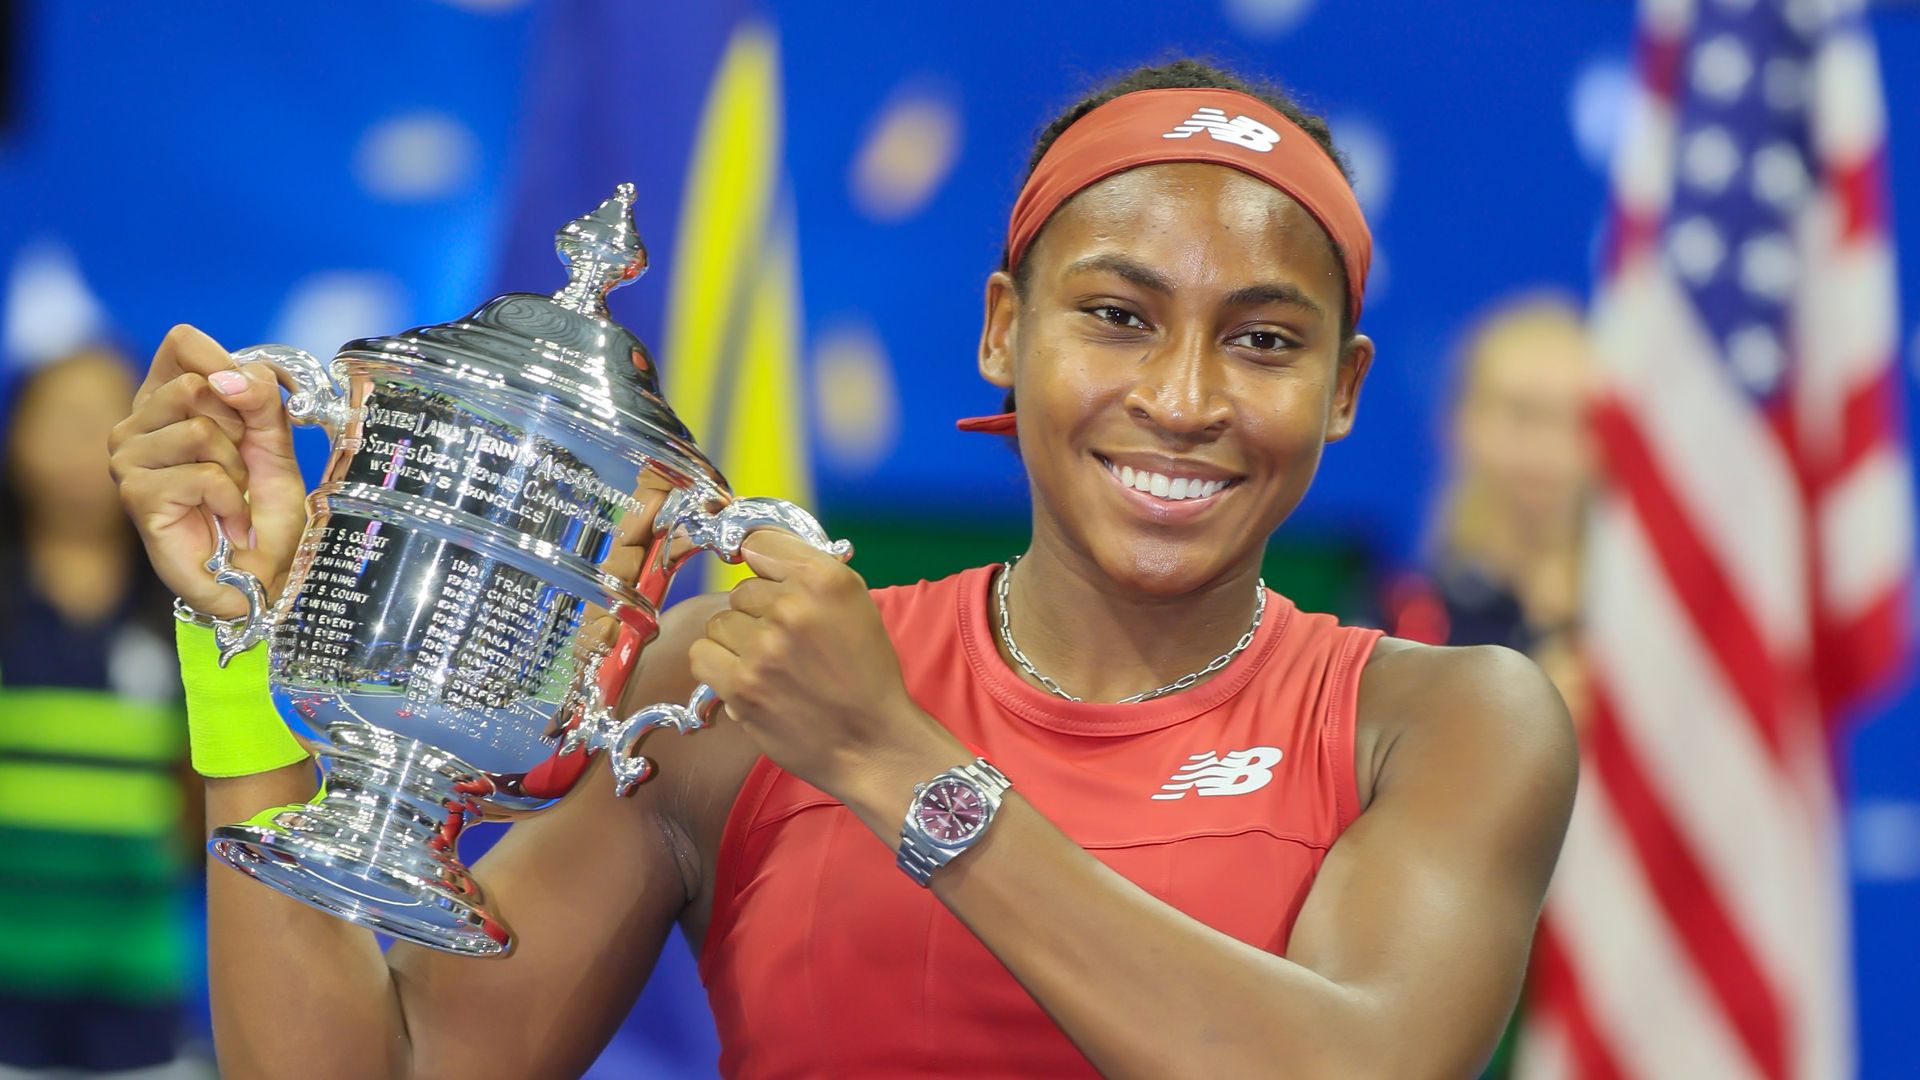 Coco Gauff holding her trophy after defeating Aryna Sabalenka to win her first grand slam in the the Women's Singles US Open Tennis Championships in New York on Sept. 9, 2023